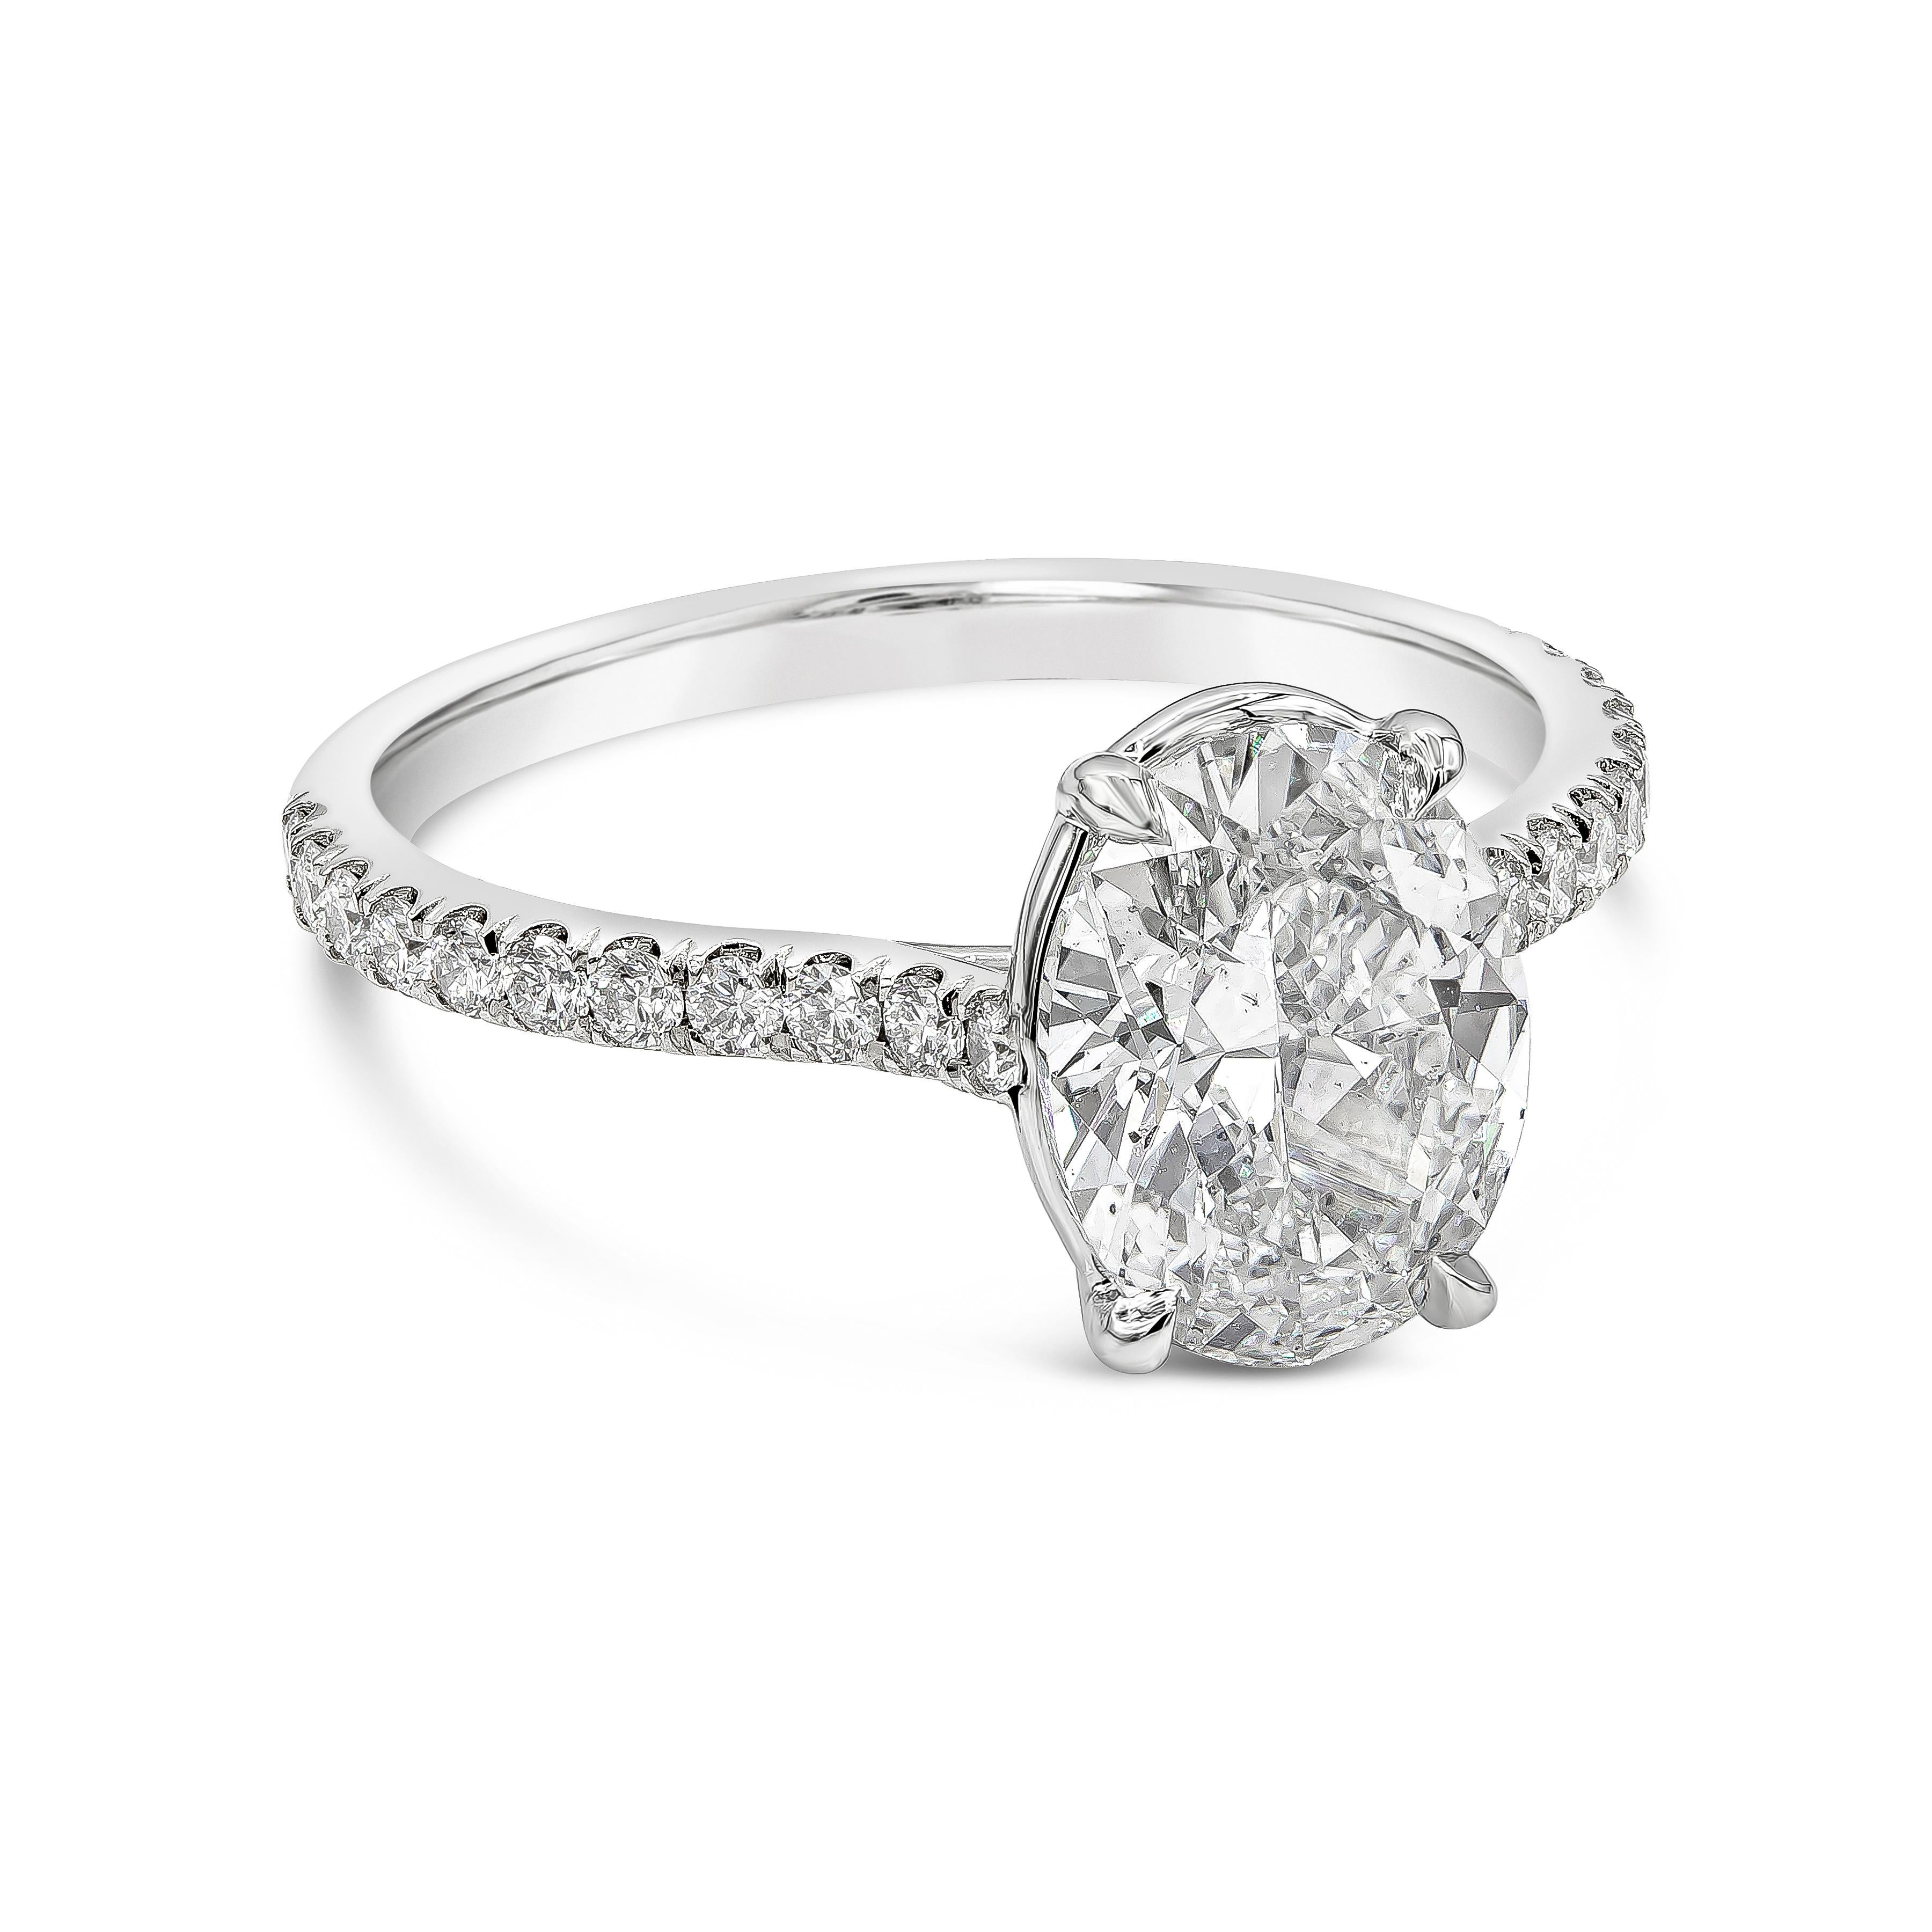 A timeless engagement ring showcasing a GIA Certified 2.02 carat oval cut diamond, G Color and VS1 in Clarity. Accented with round melee brilliant diamonds down the band, weighing 0.32 carats total. Made with Platinum. Size 6.25 US

Style available